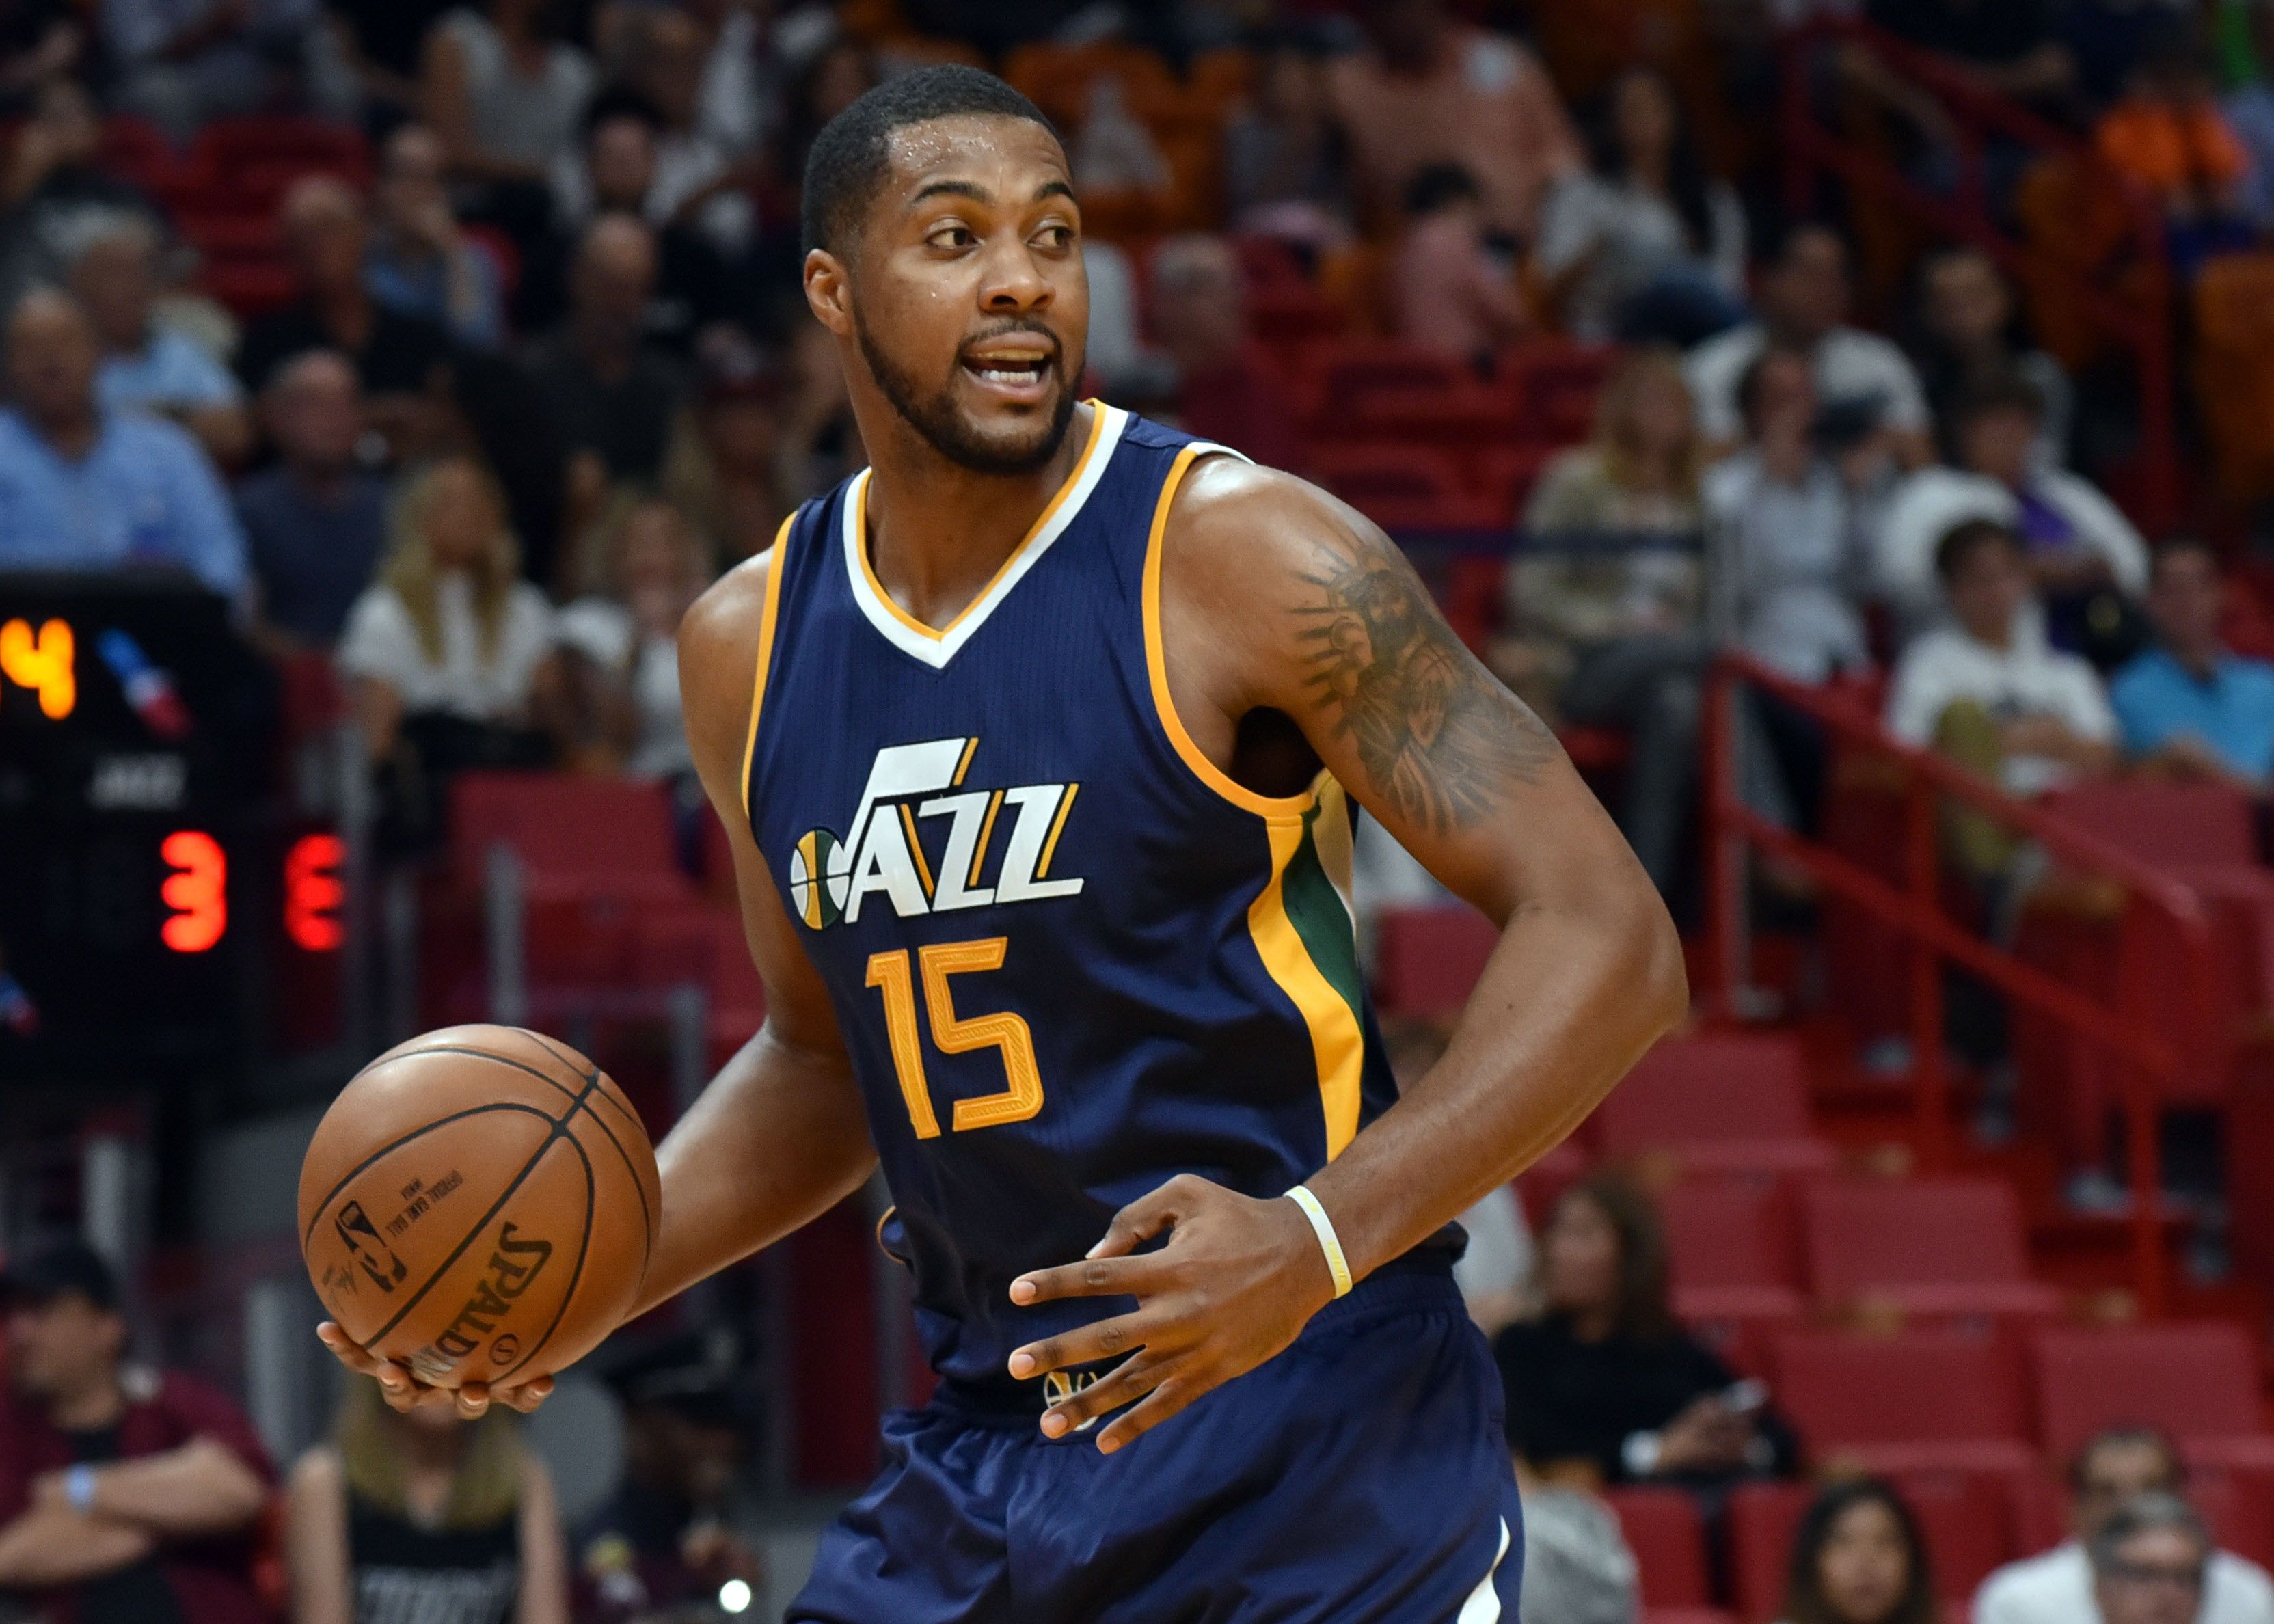 Is Derrick Favors' injury history an obstacle towards extending